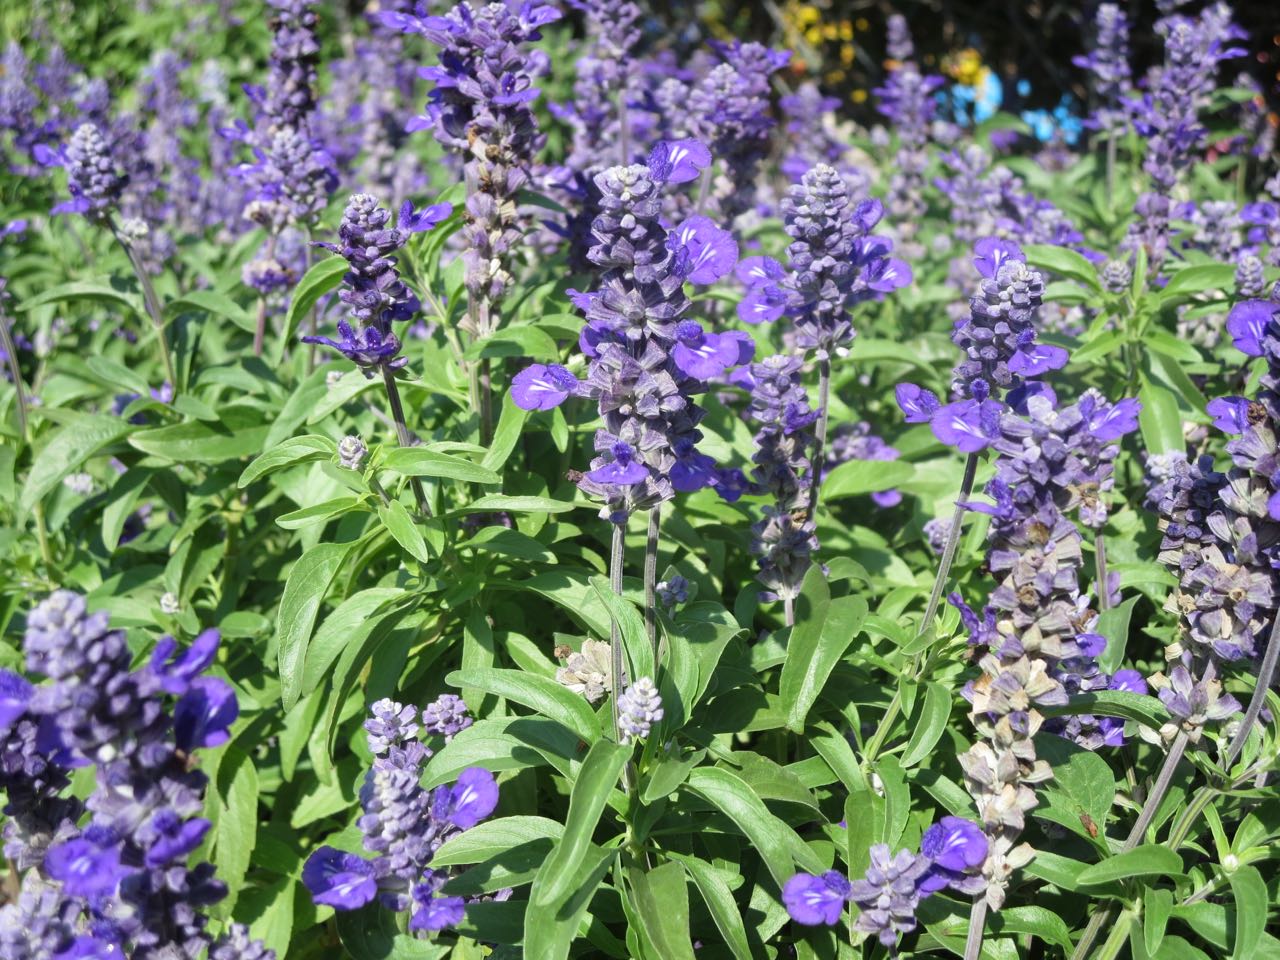 Salvia is a great perennial for San Antonio landscapes.